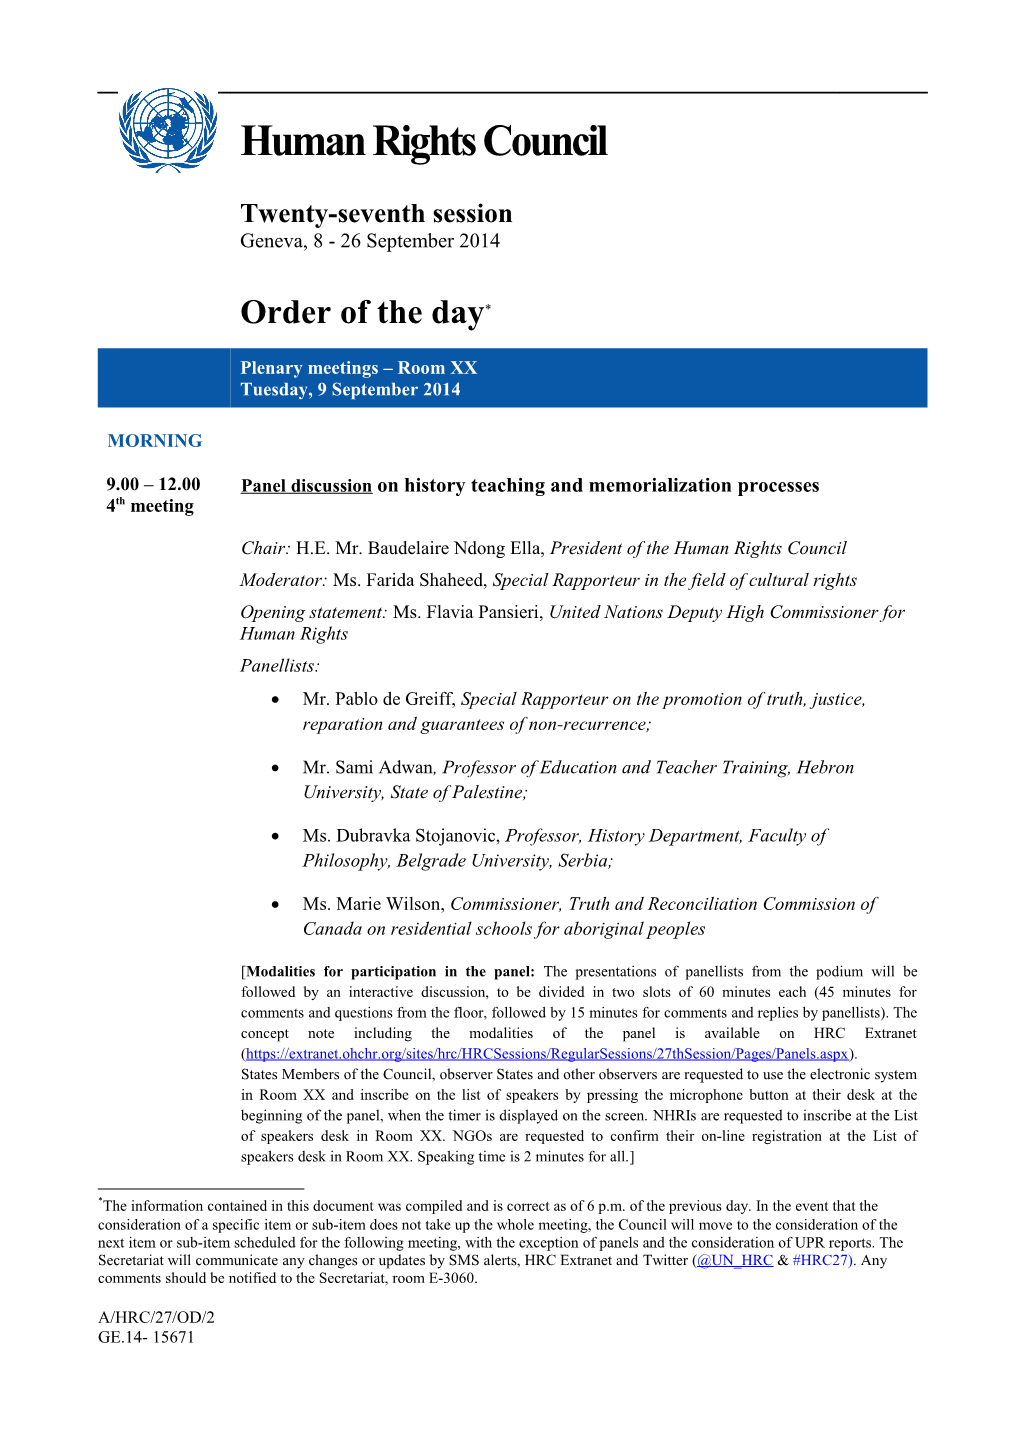 Order of the Day, Tuesday, 9 September 2014 in English (Word)